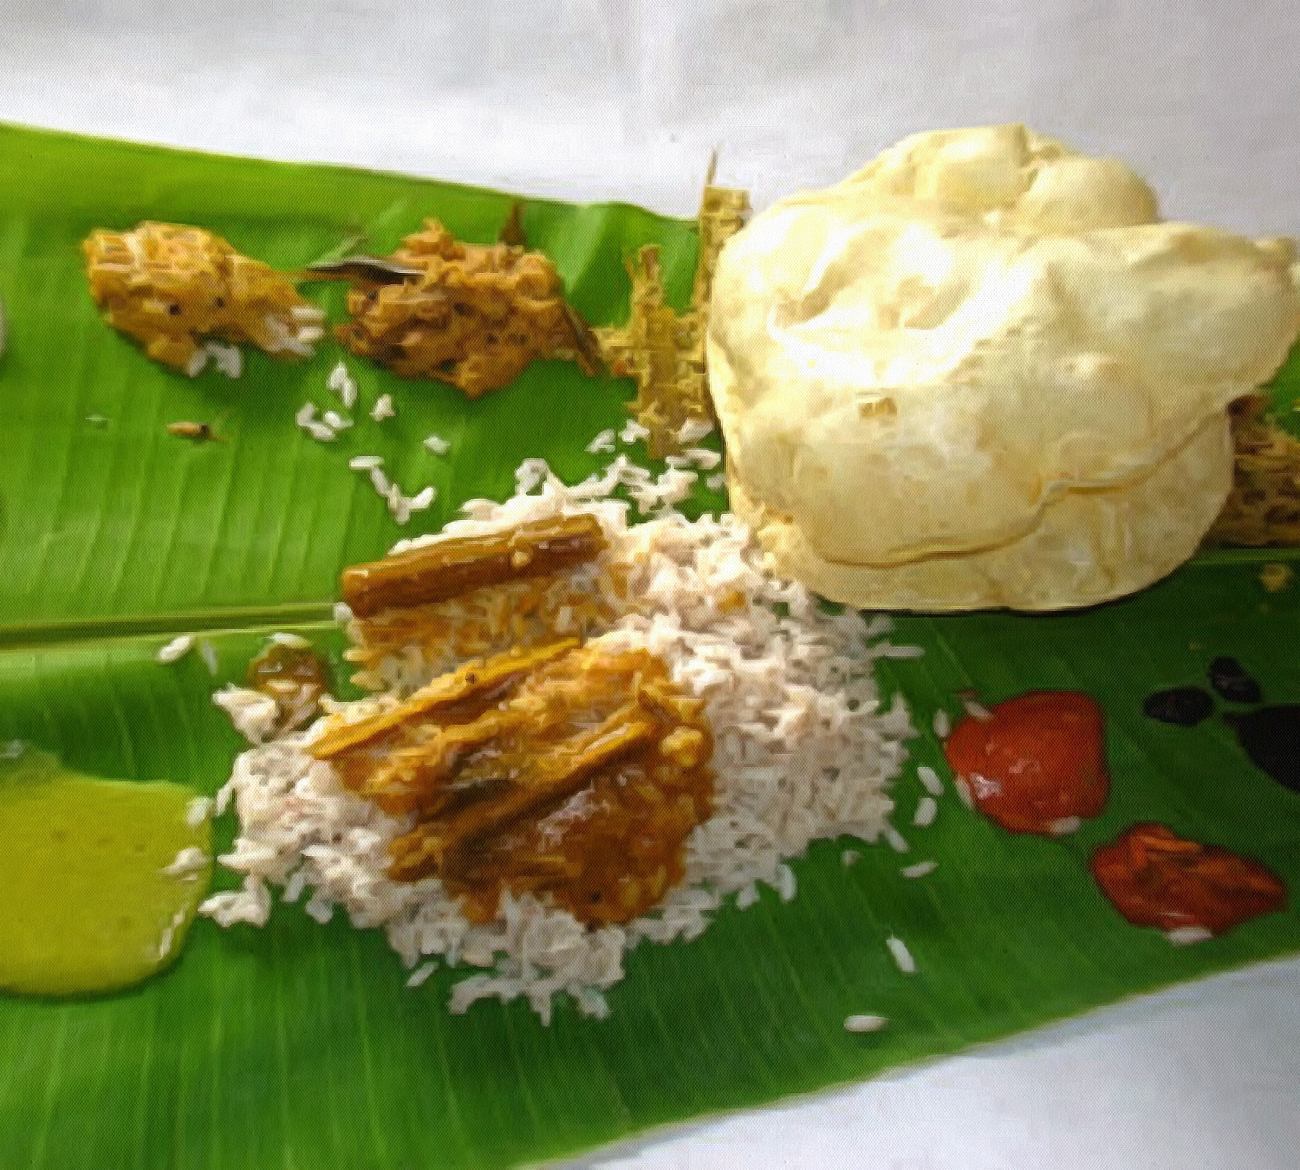 Lunch on banana leaf in South India